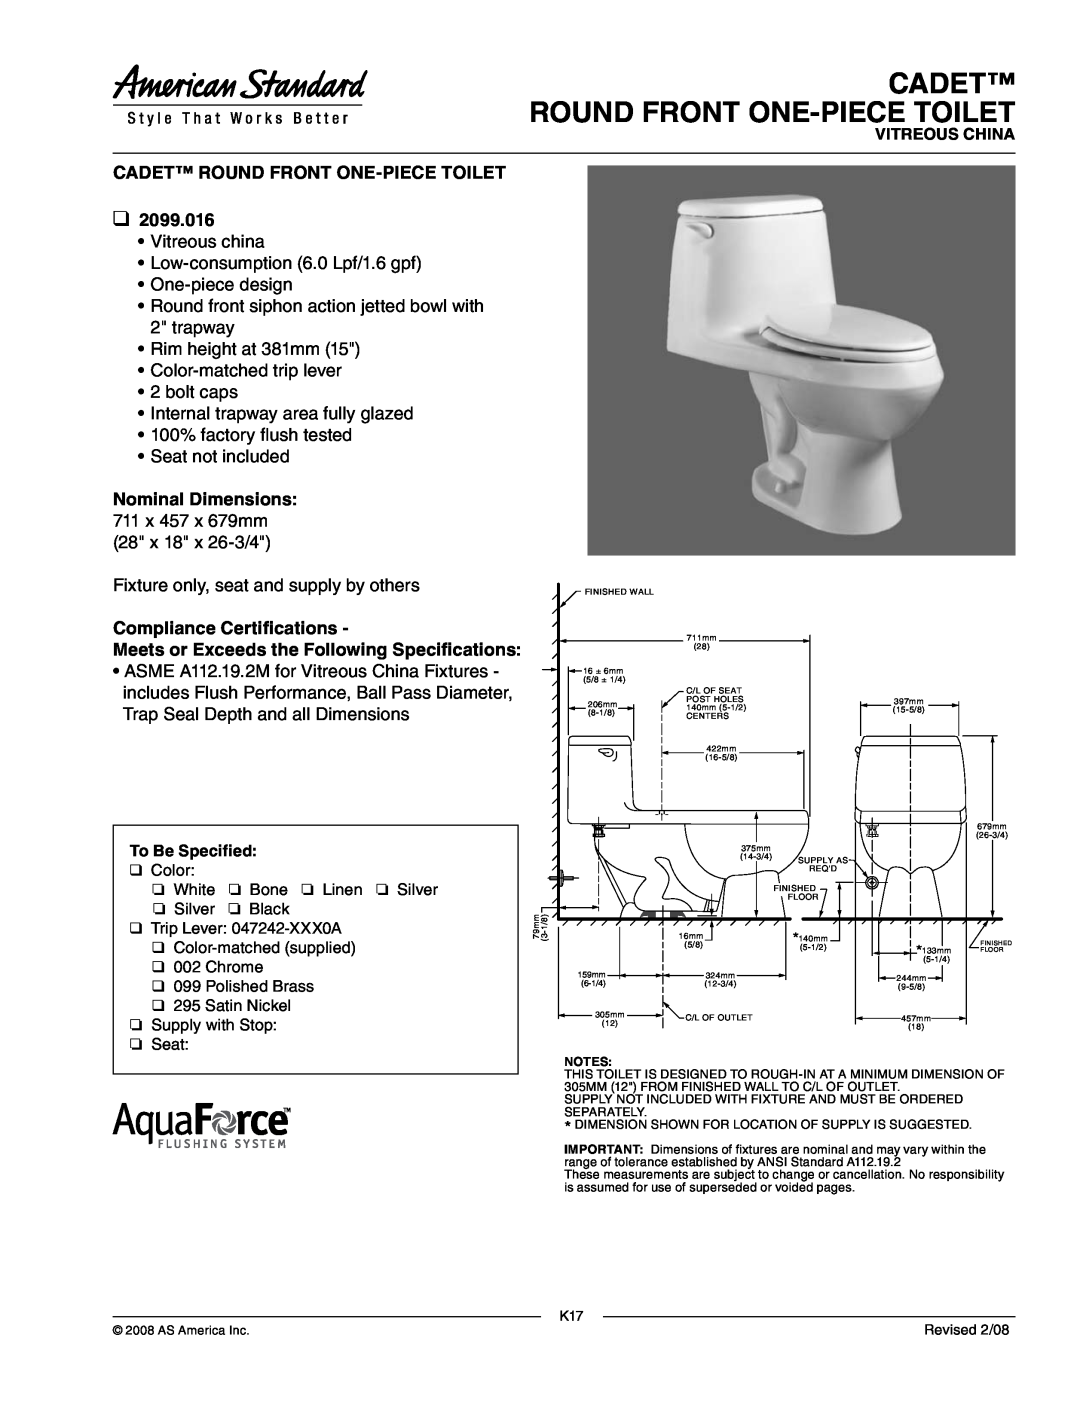 American Standard 2099.016 dimensions Cadet Round Front One-Piecetoilet, Vitreous china Low-consumption6.0 Lpf/1.6 gpf 